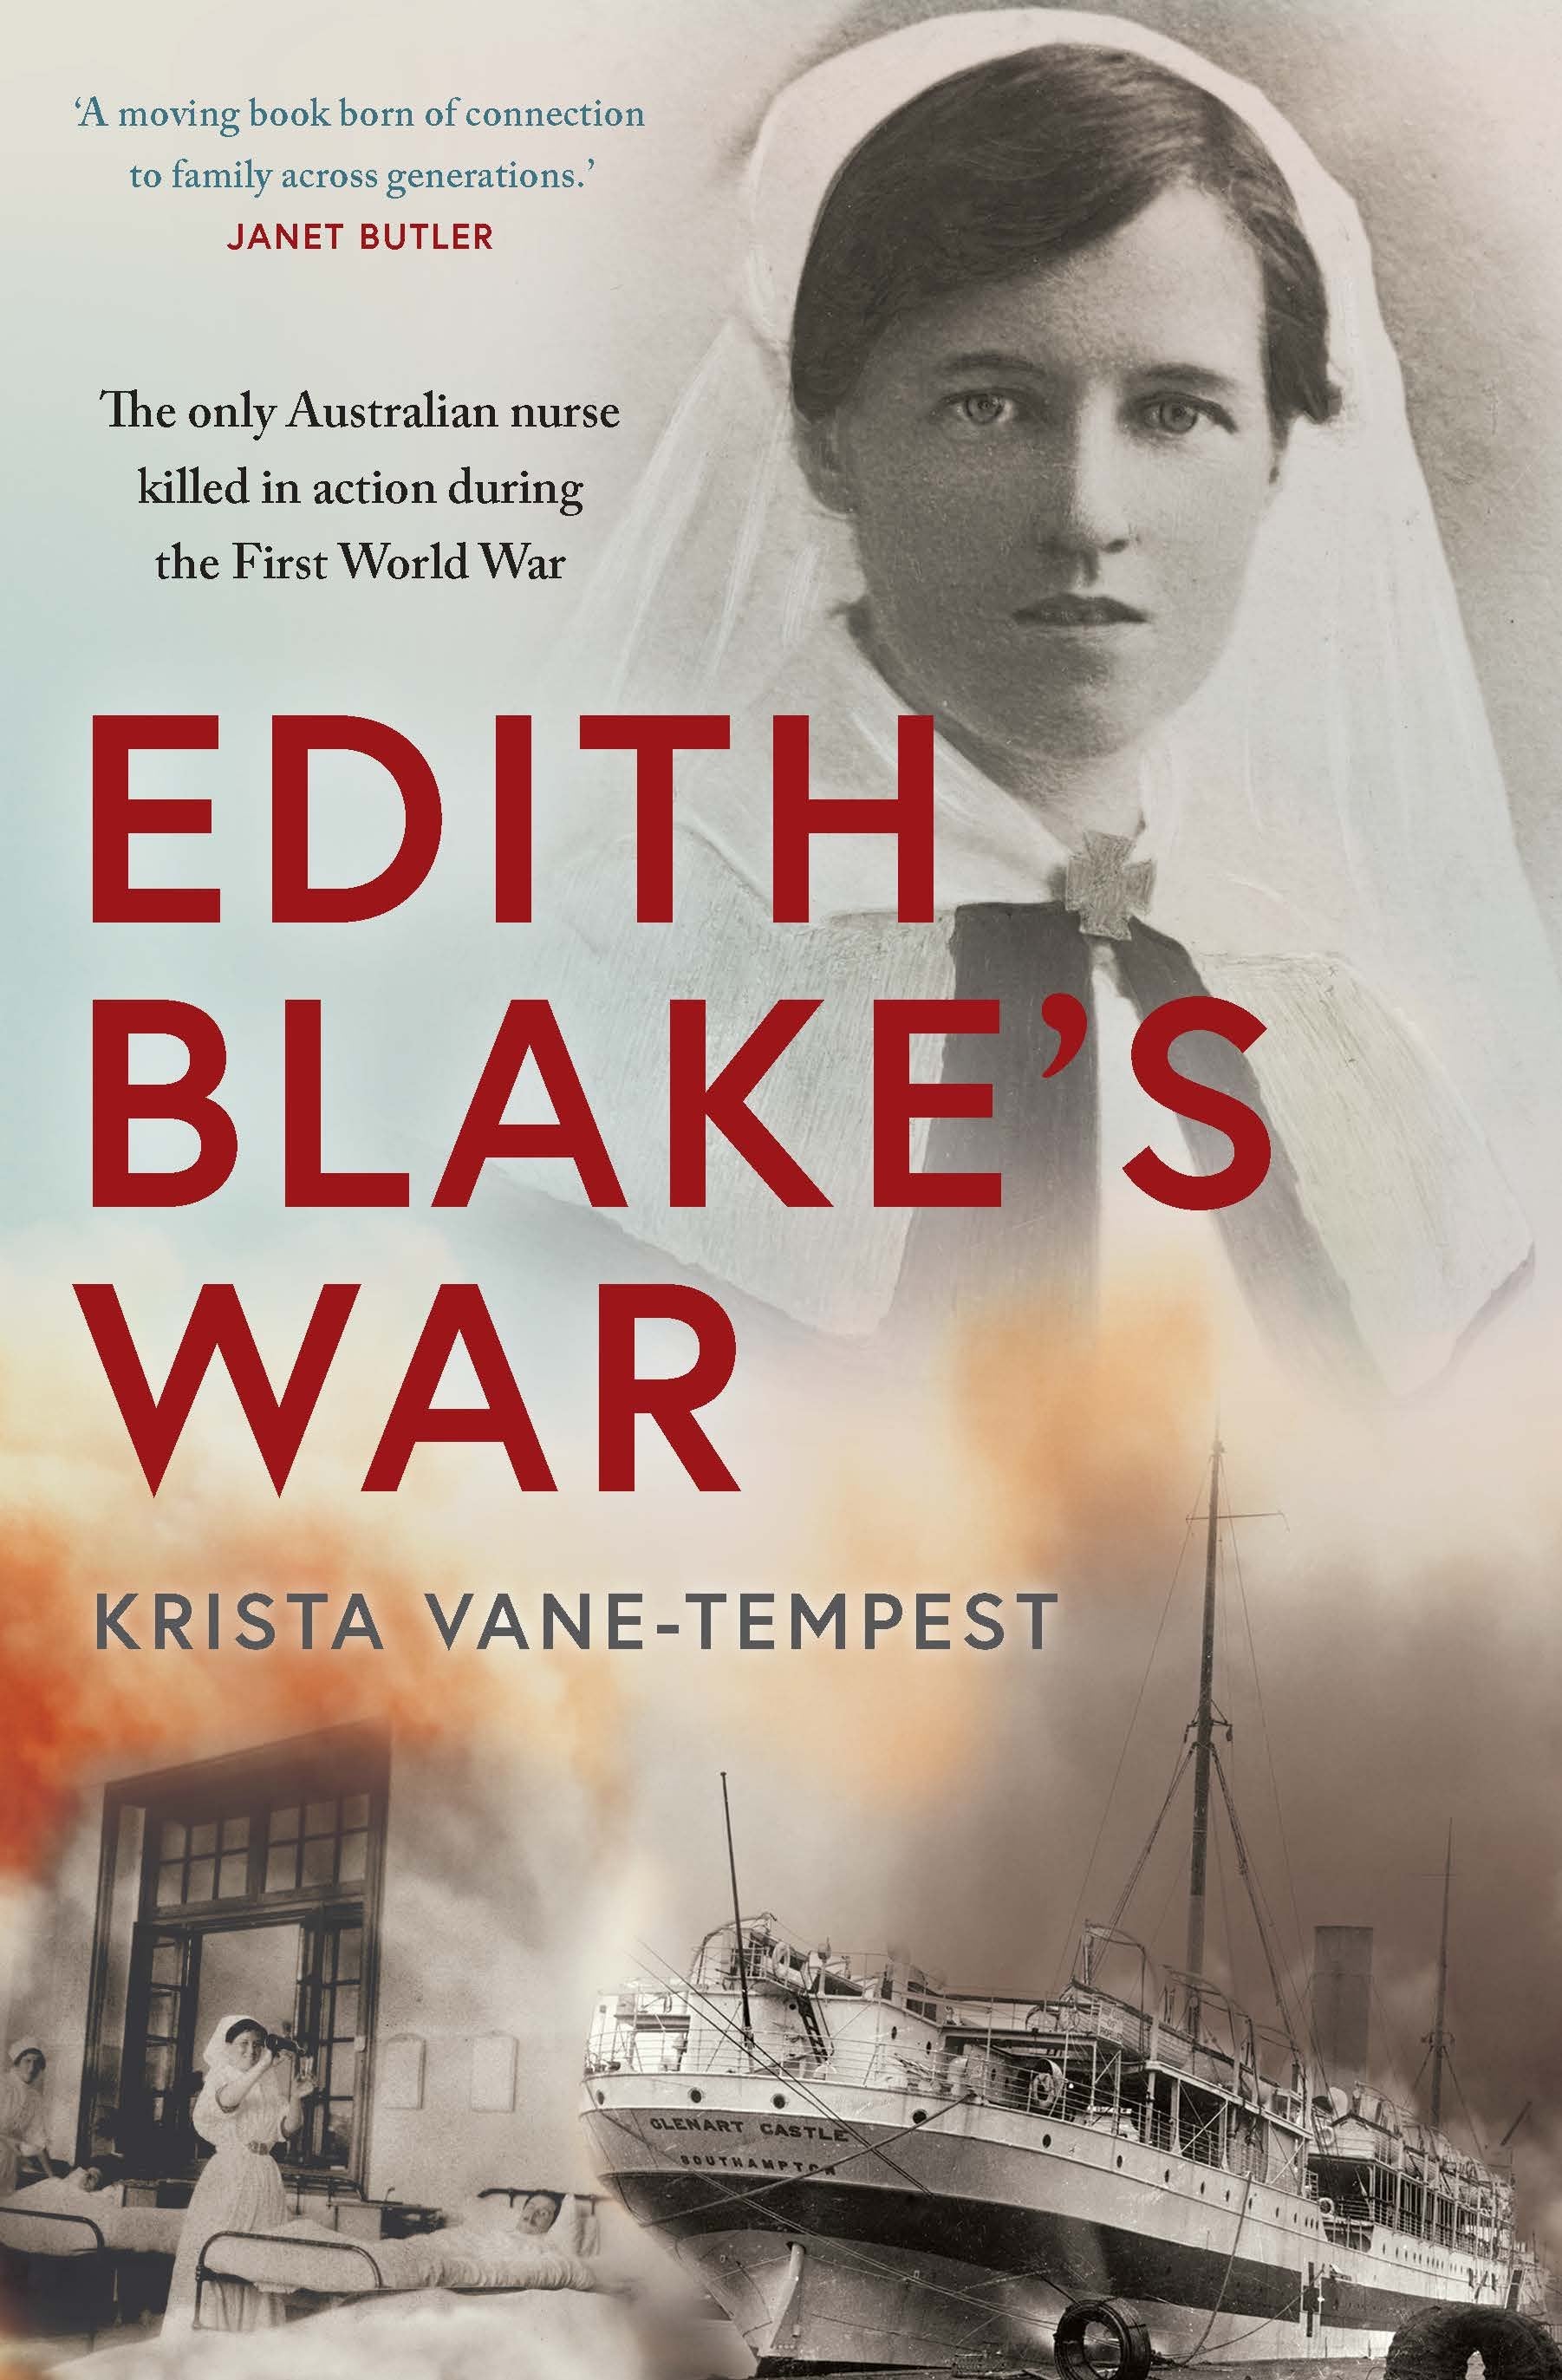 Edith Blake’s War: The Only Australian Nurse Killed in Action During the First World War